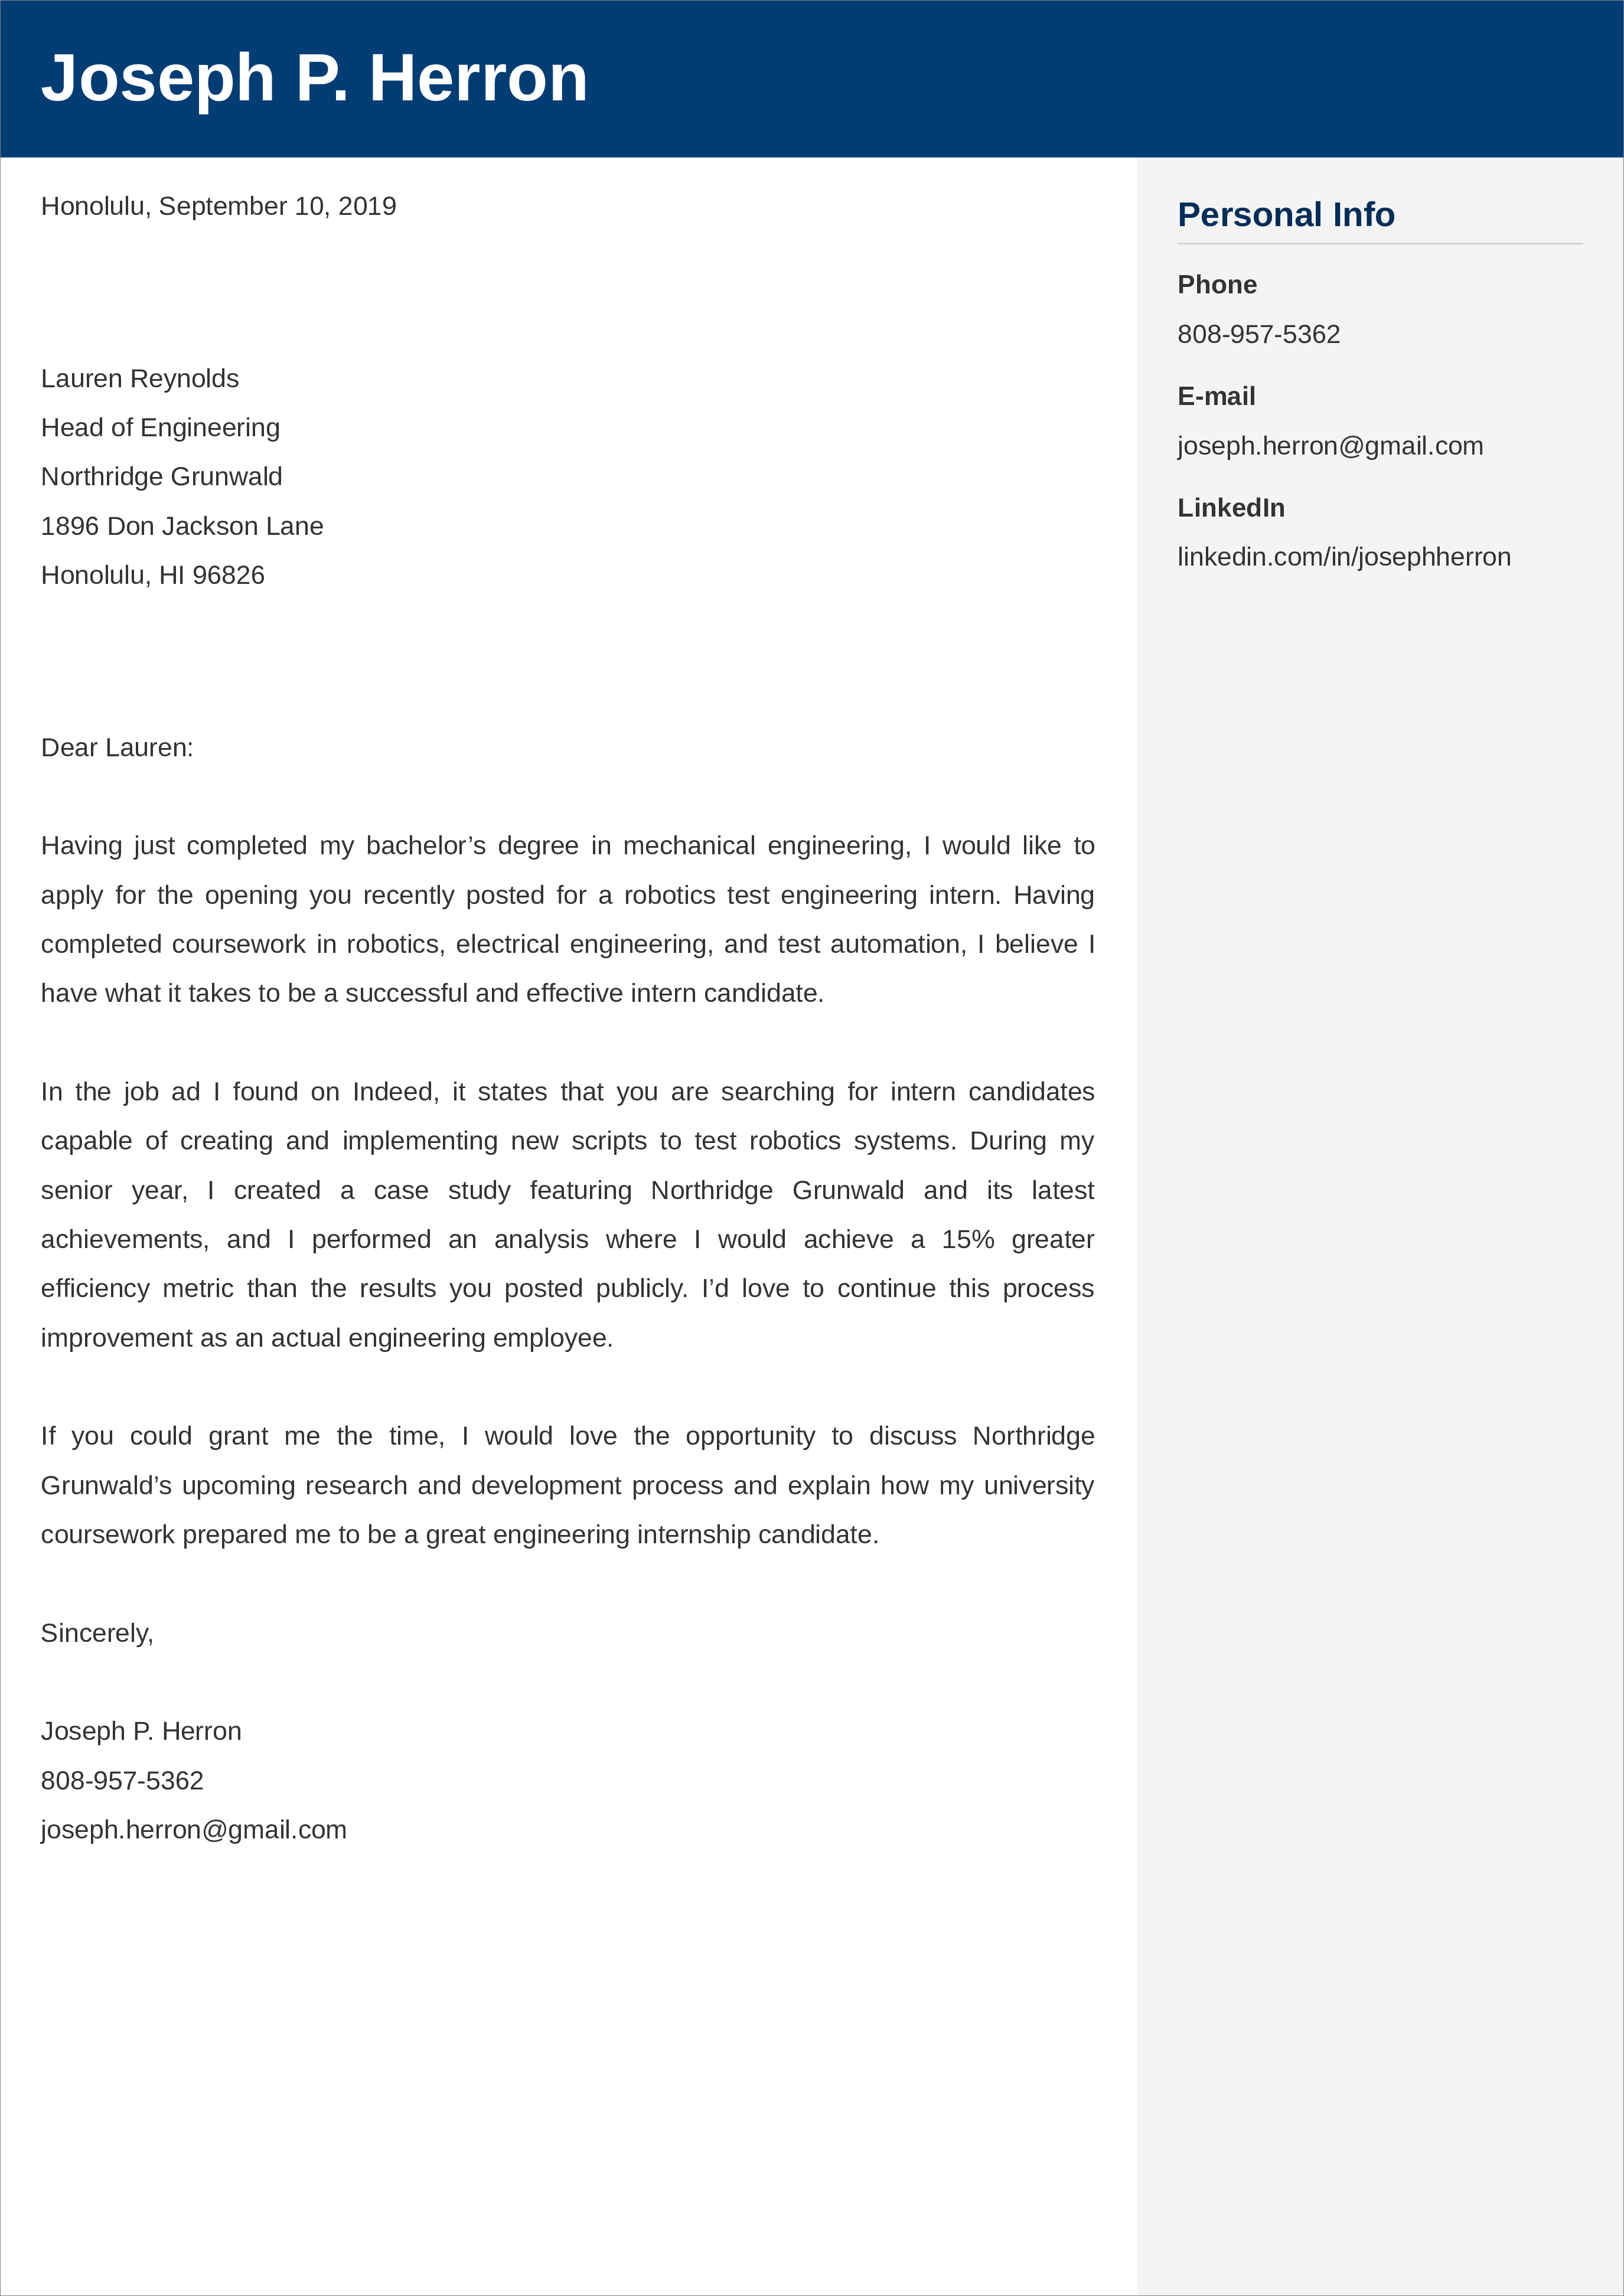 Cover Letter For Transfer Within Same Company from cdn-images.resumelab.com